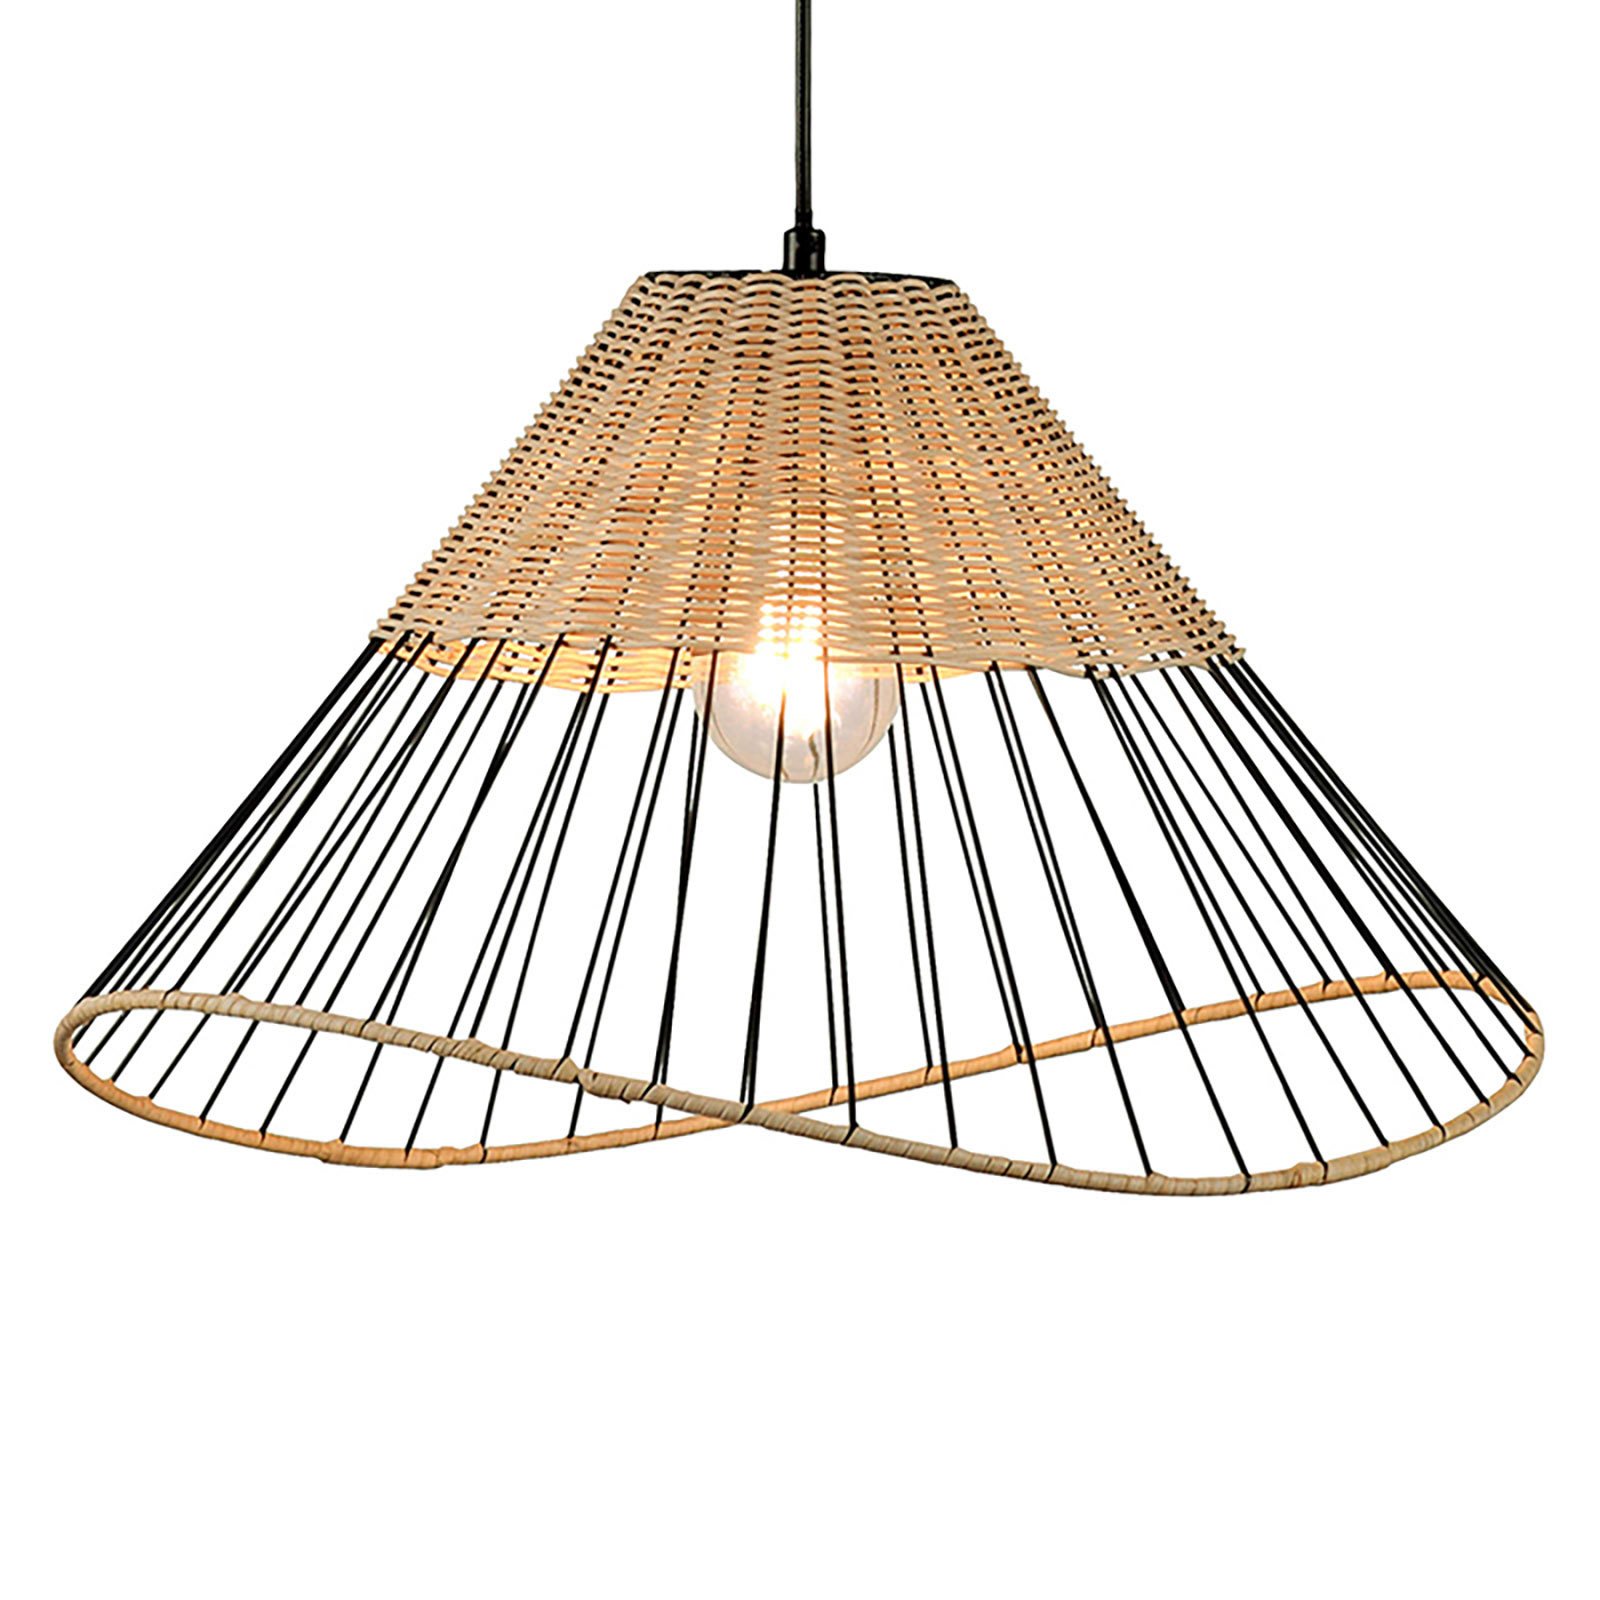 Reed hanging light, conical lampshade